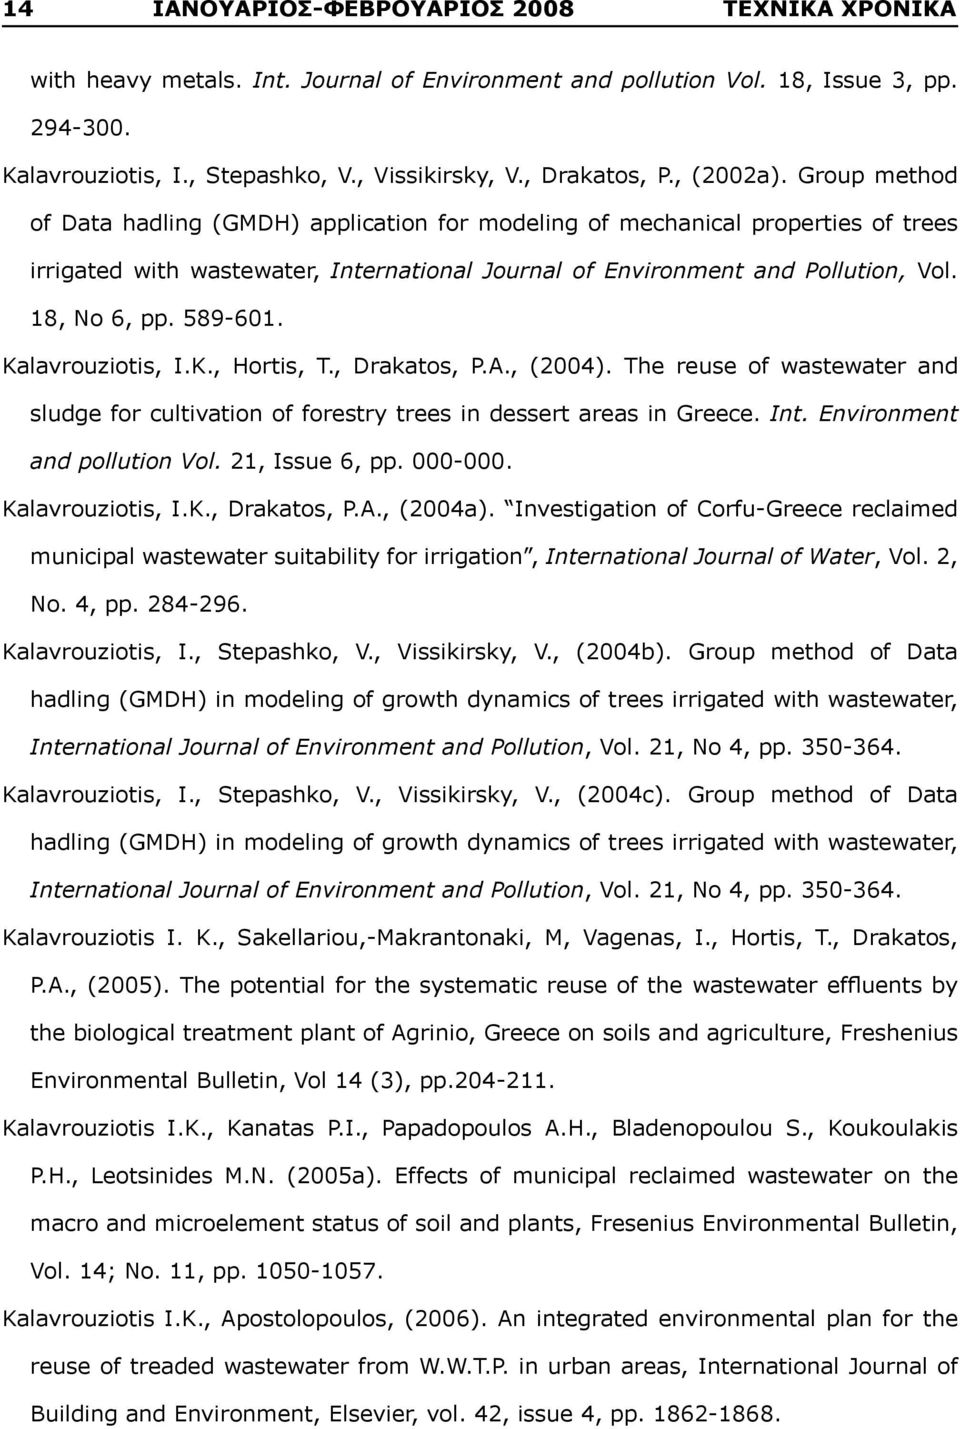 Group method of Data hadling (GMDH) application for modeling of mechanical properties of trees irrigated with wastewater, International Journal of Environment and Pollution, Vol. 18, No 6, pp.